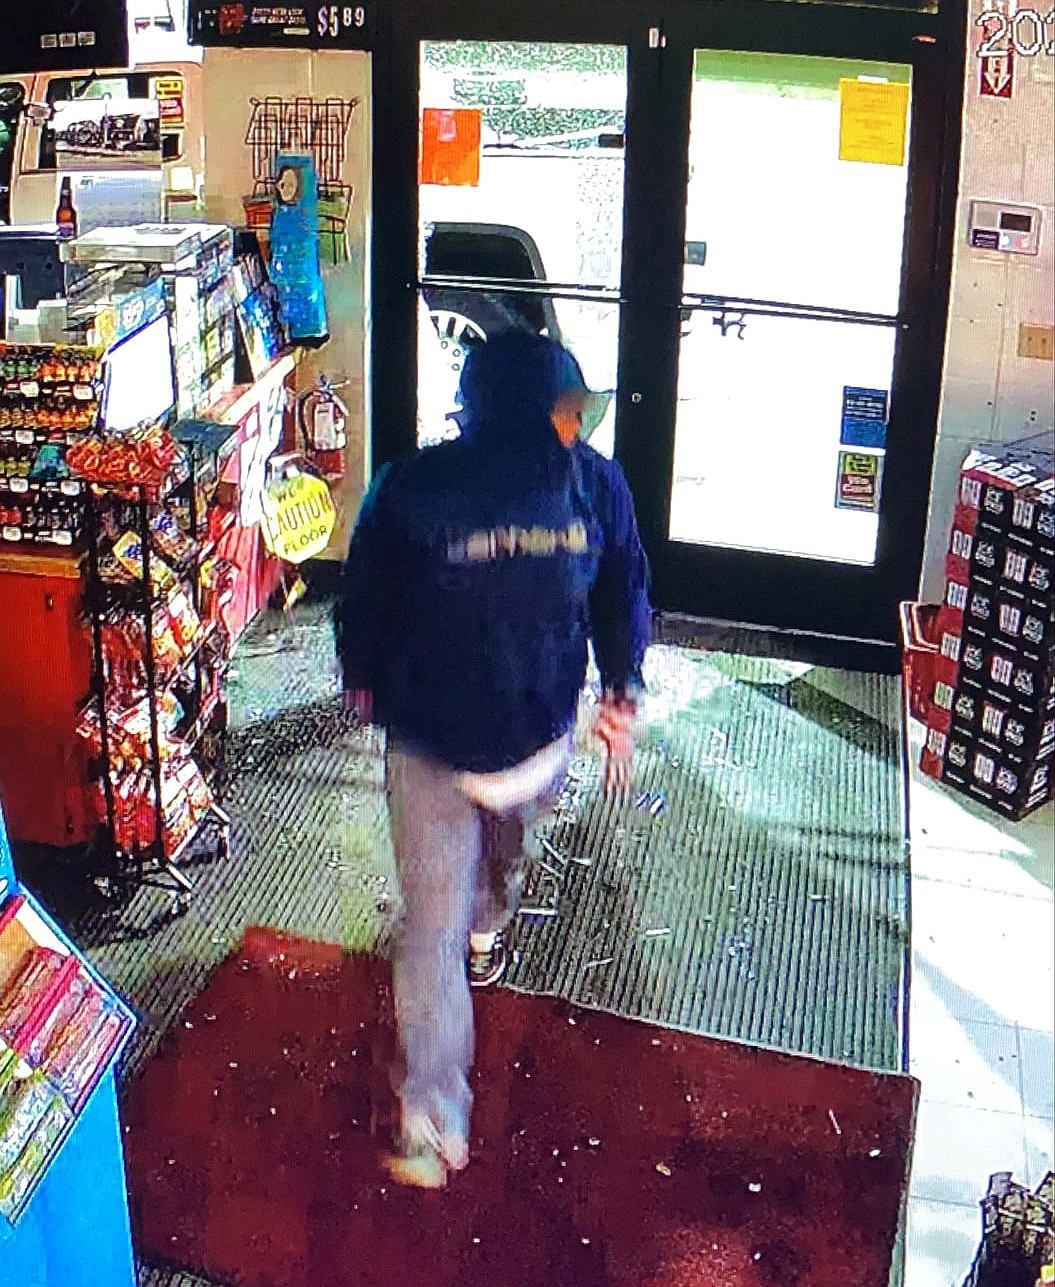 This and one other male individual were responsible for stealing the Pinehurst Super-Stop Conoco ATM.